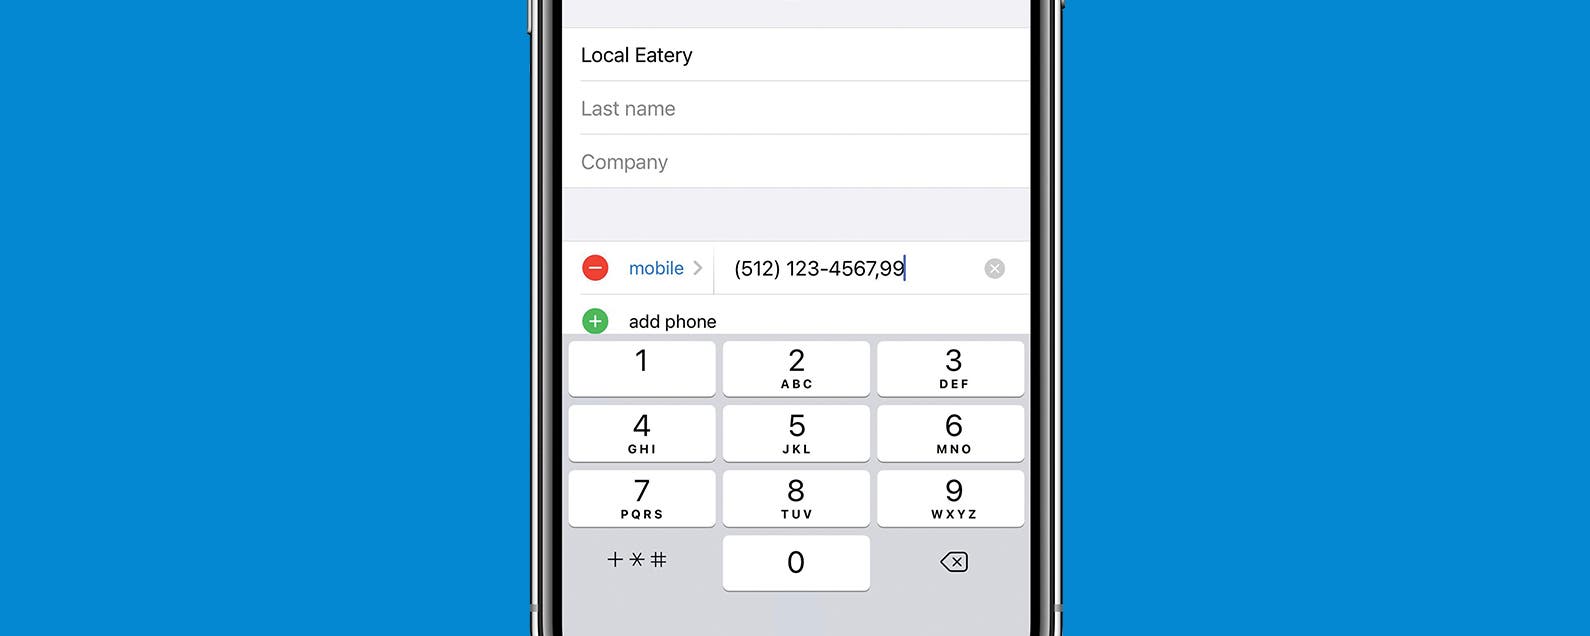 How to Dial An Extension on an iPhone & Save Extensions to